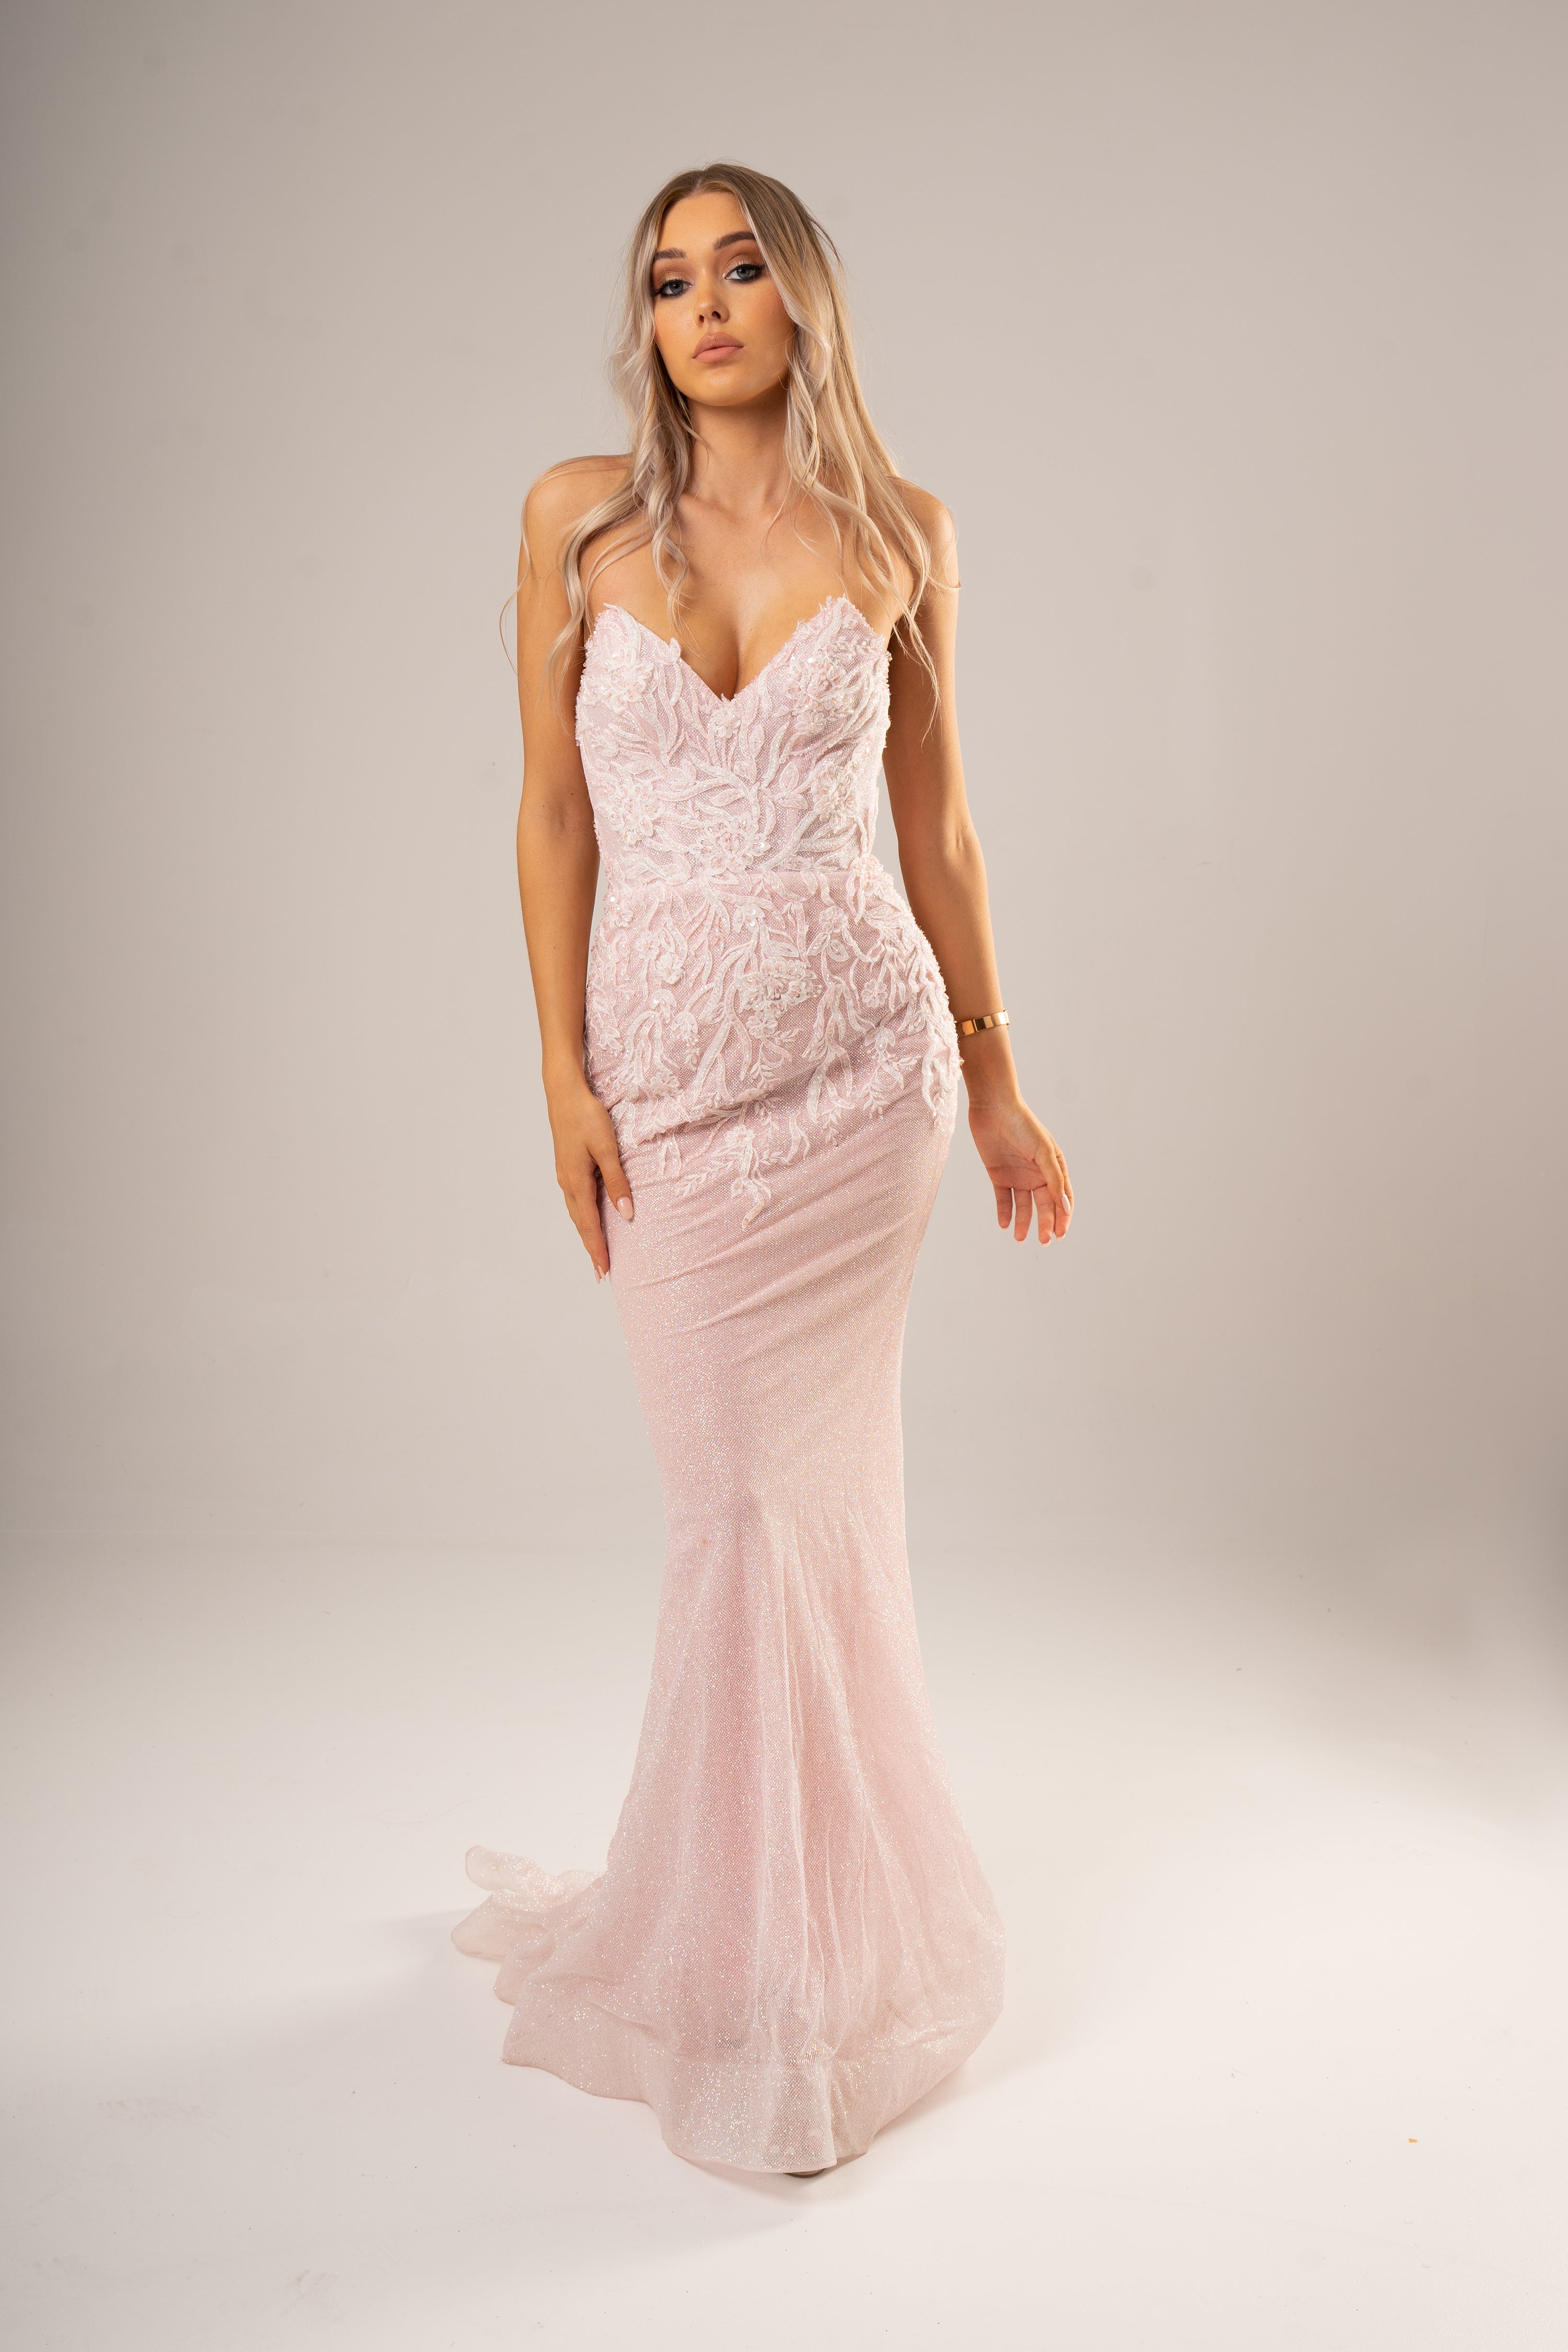 Sparkling pink dress with strapless deep V neckline and corset